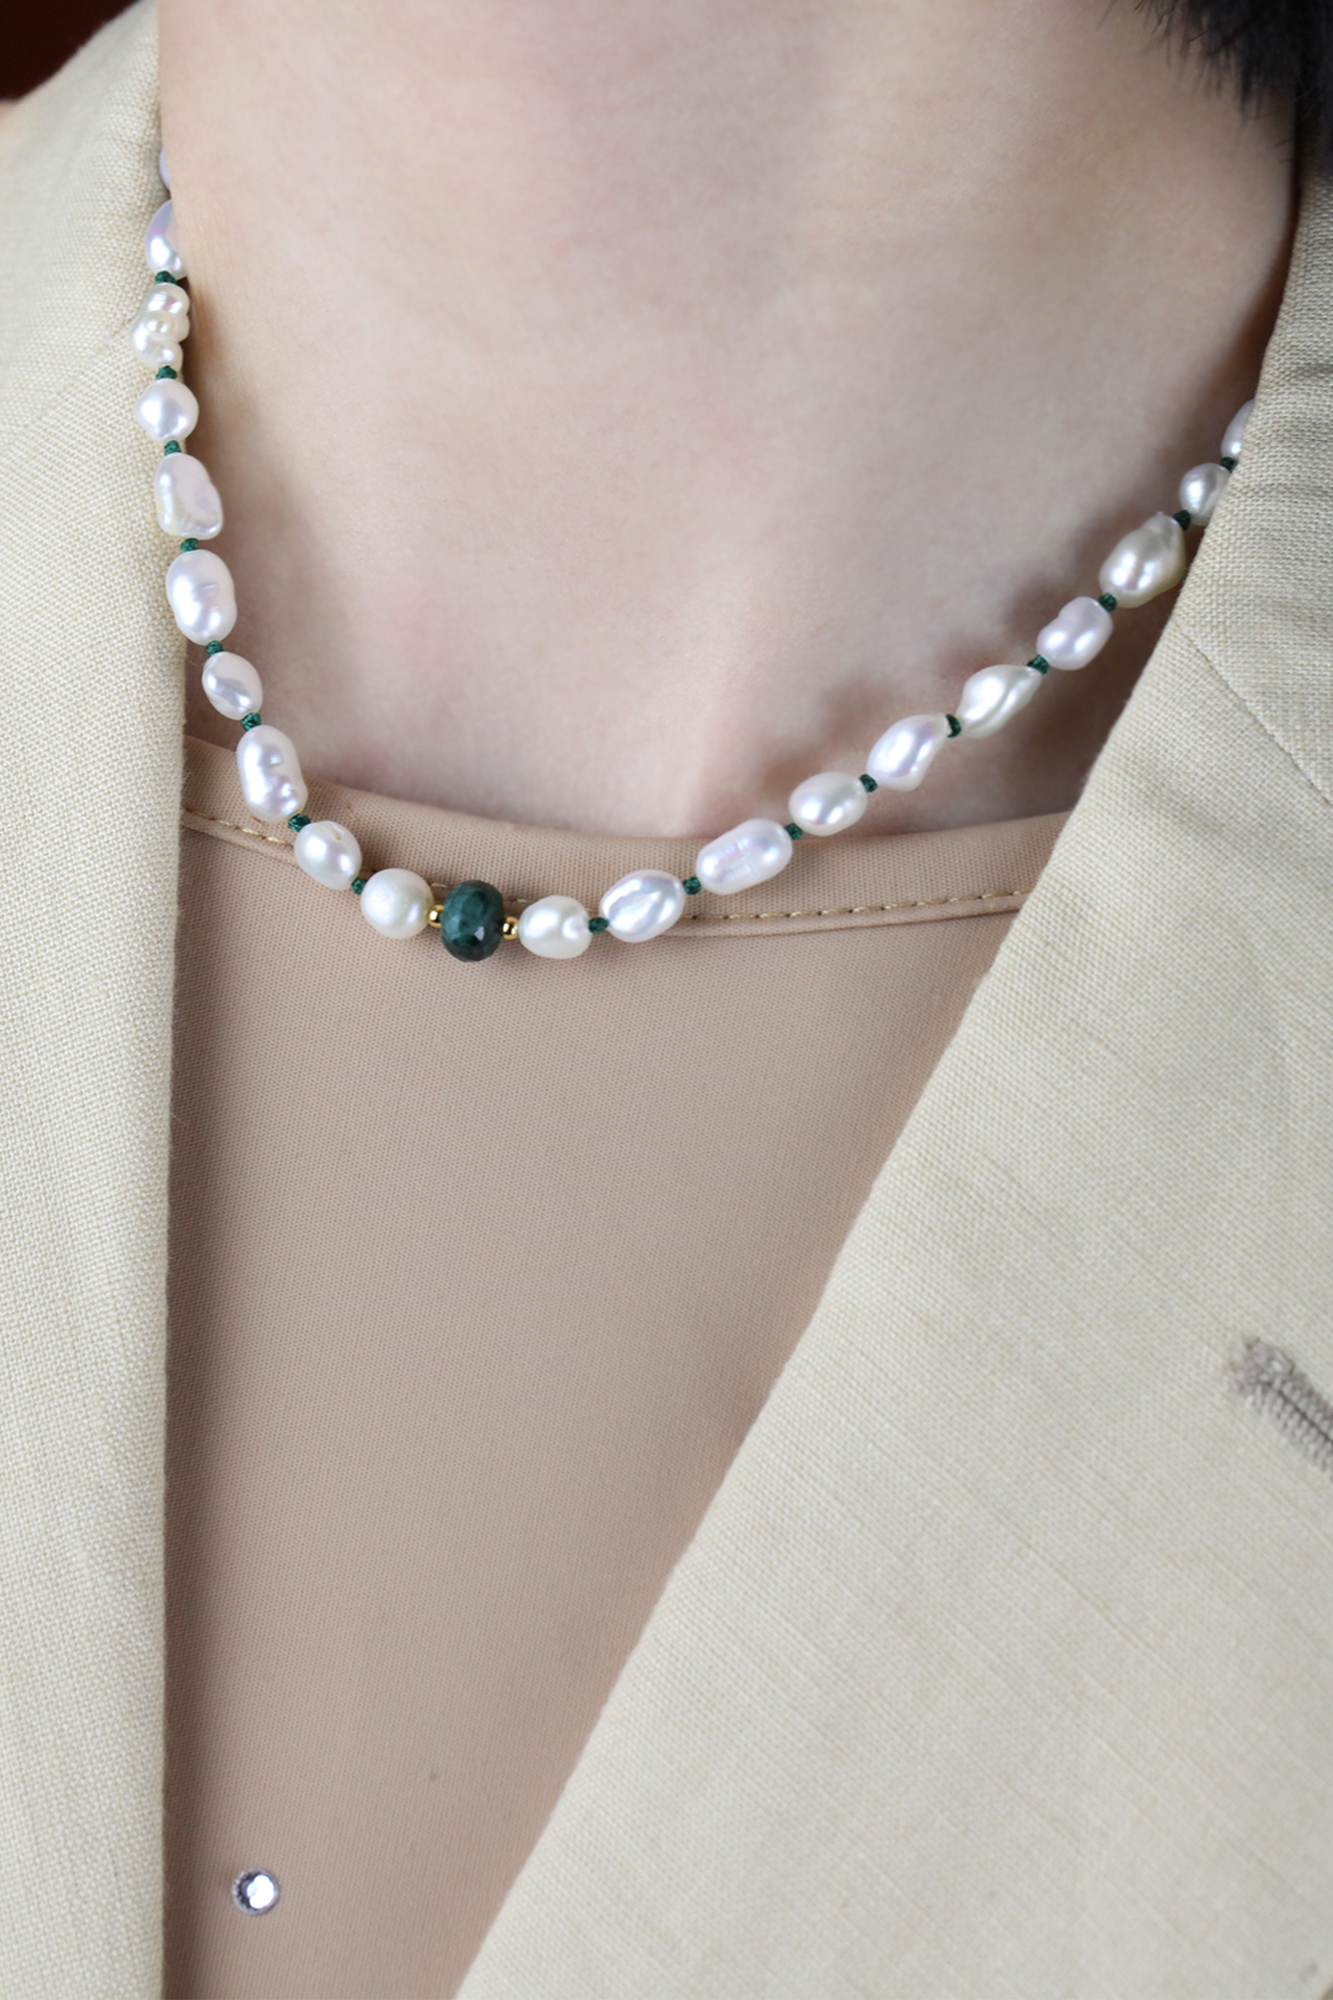 ALL KNOT EMERALD NECKLACE